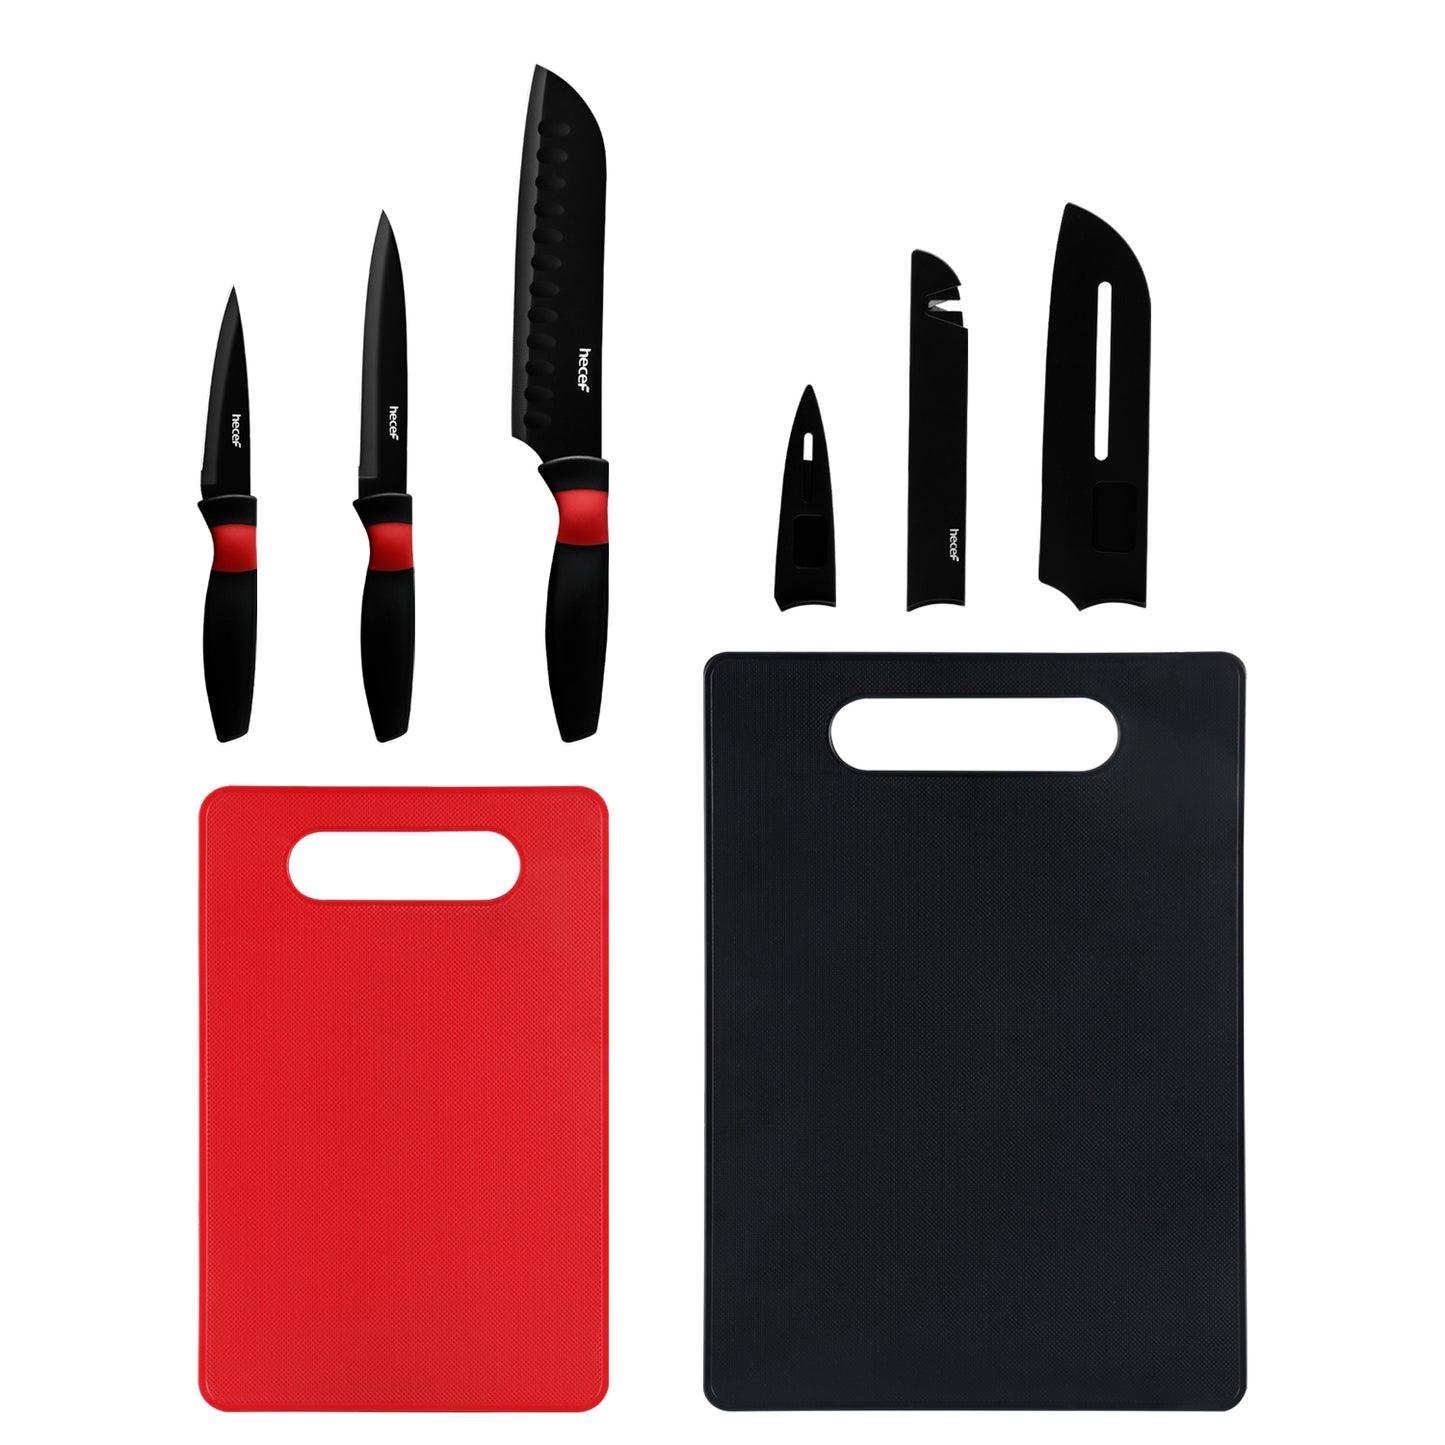 Hecef Kitchen Red Dot Knife Set 8pcs with Cutting Boards & Sheaths - Hecef Kitchen